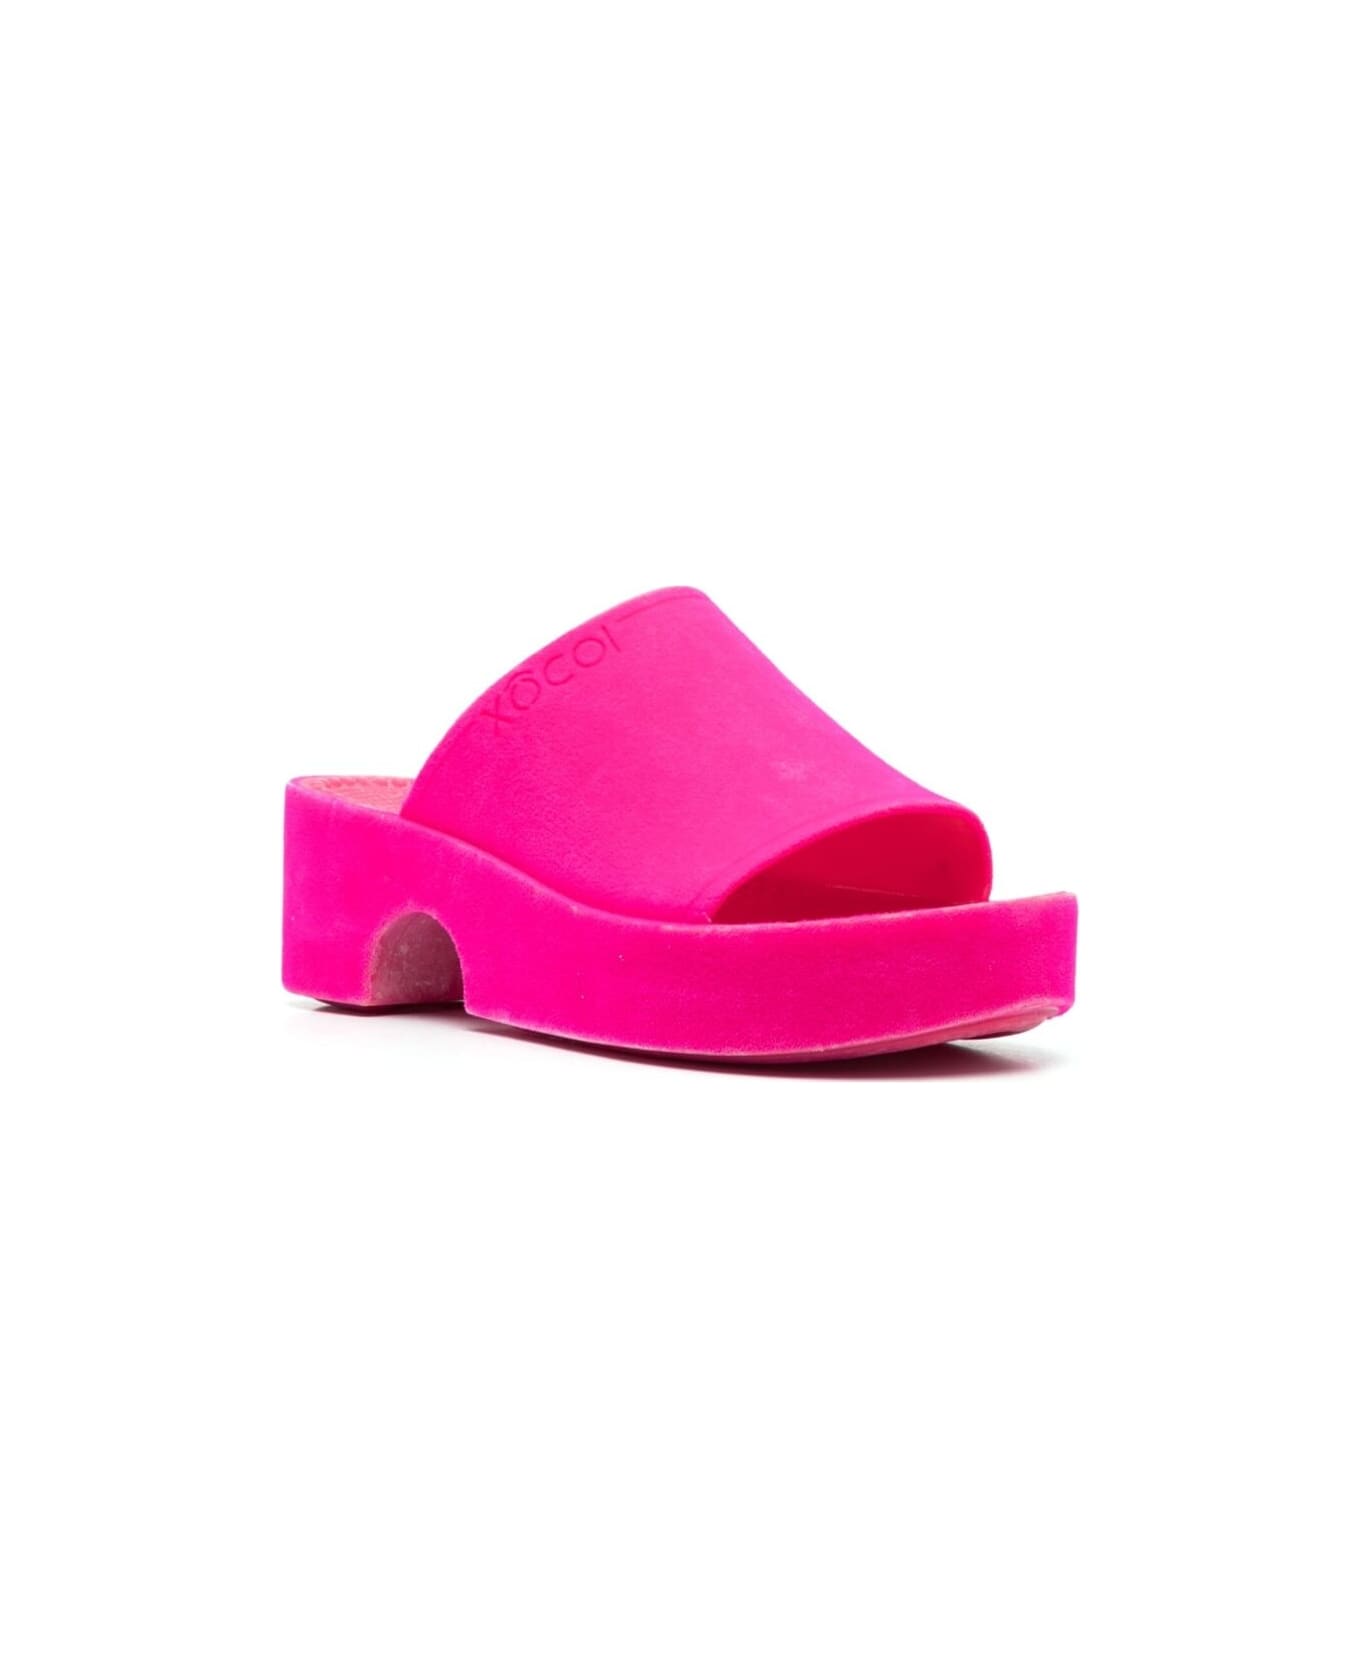 Xocoi Woman's Beige Recycled Rubber Clogs - Fuxia